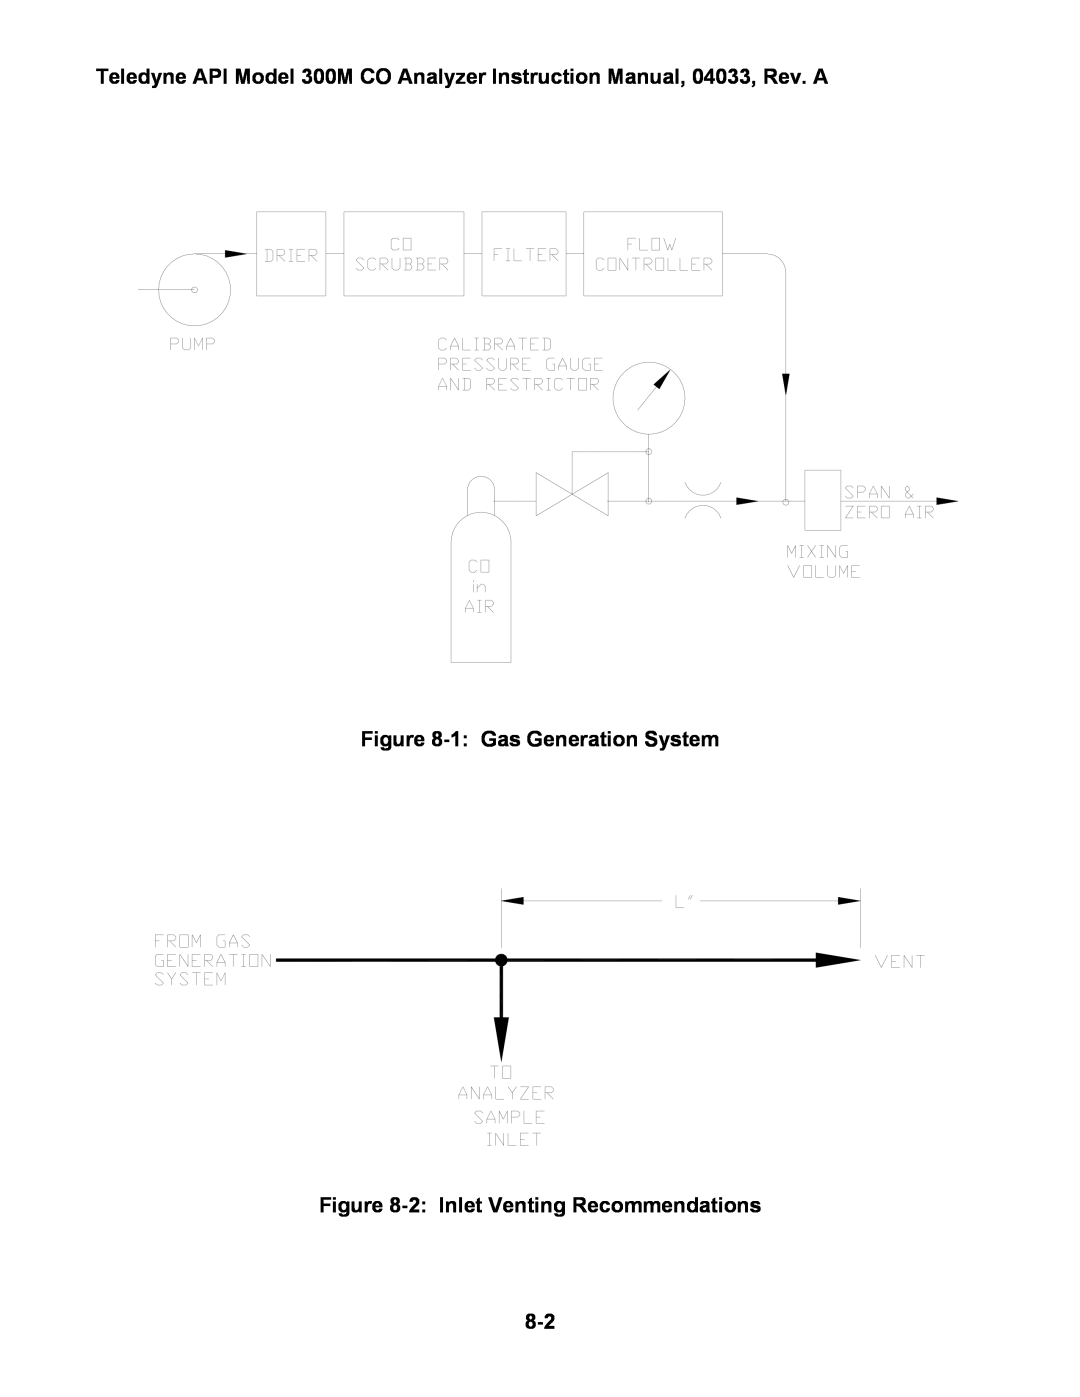 Teledyne 300M instruction manual 1 Gas Generation System, 2 Inlet Venting Recommendations 